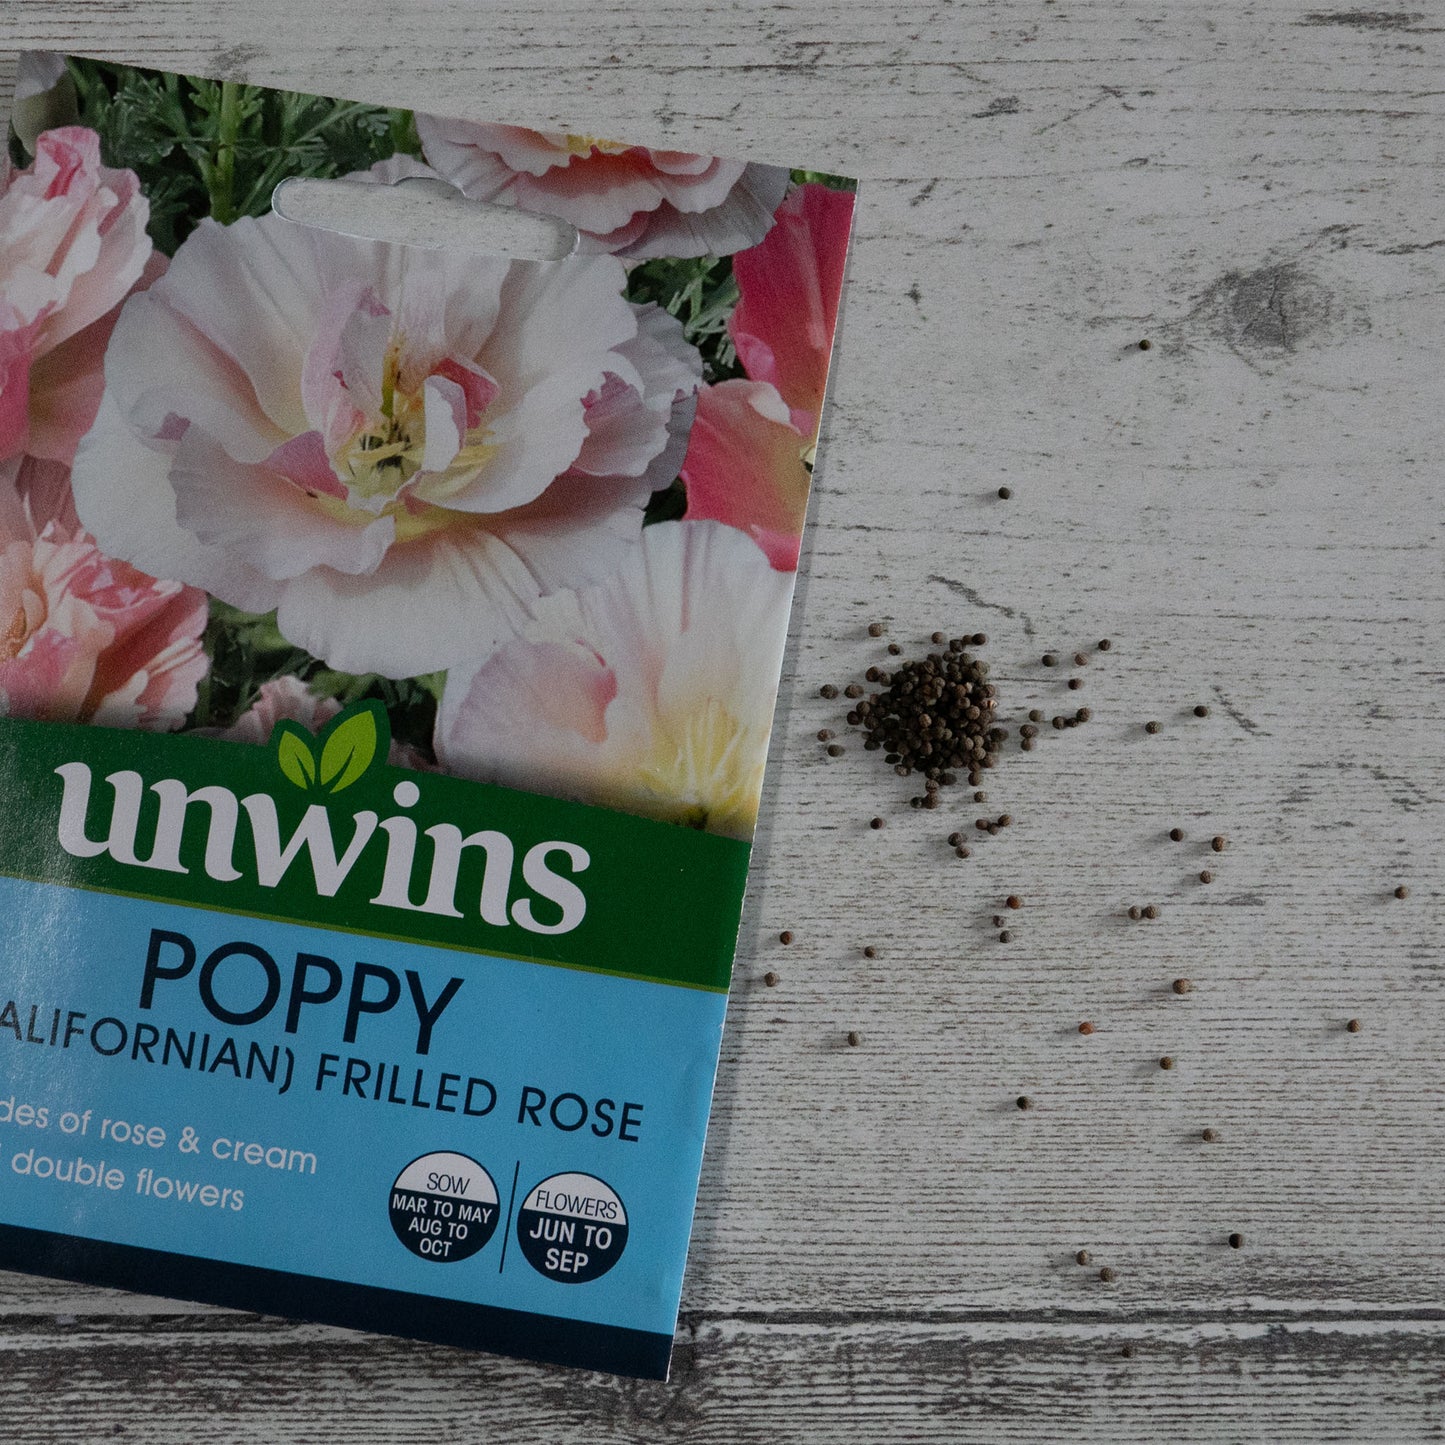 Unwins Californian Poppy Frilled Rose seeds pack on table with seeds